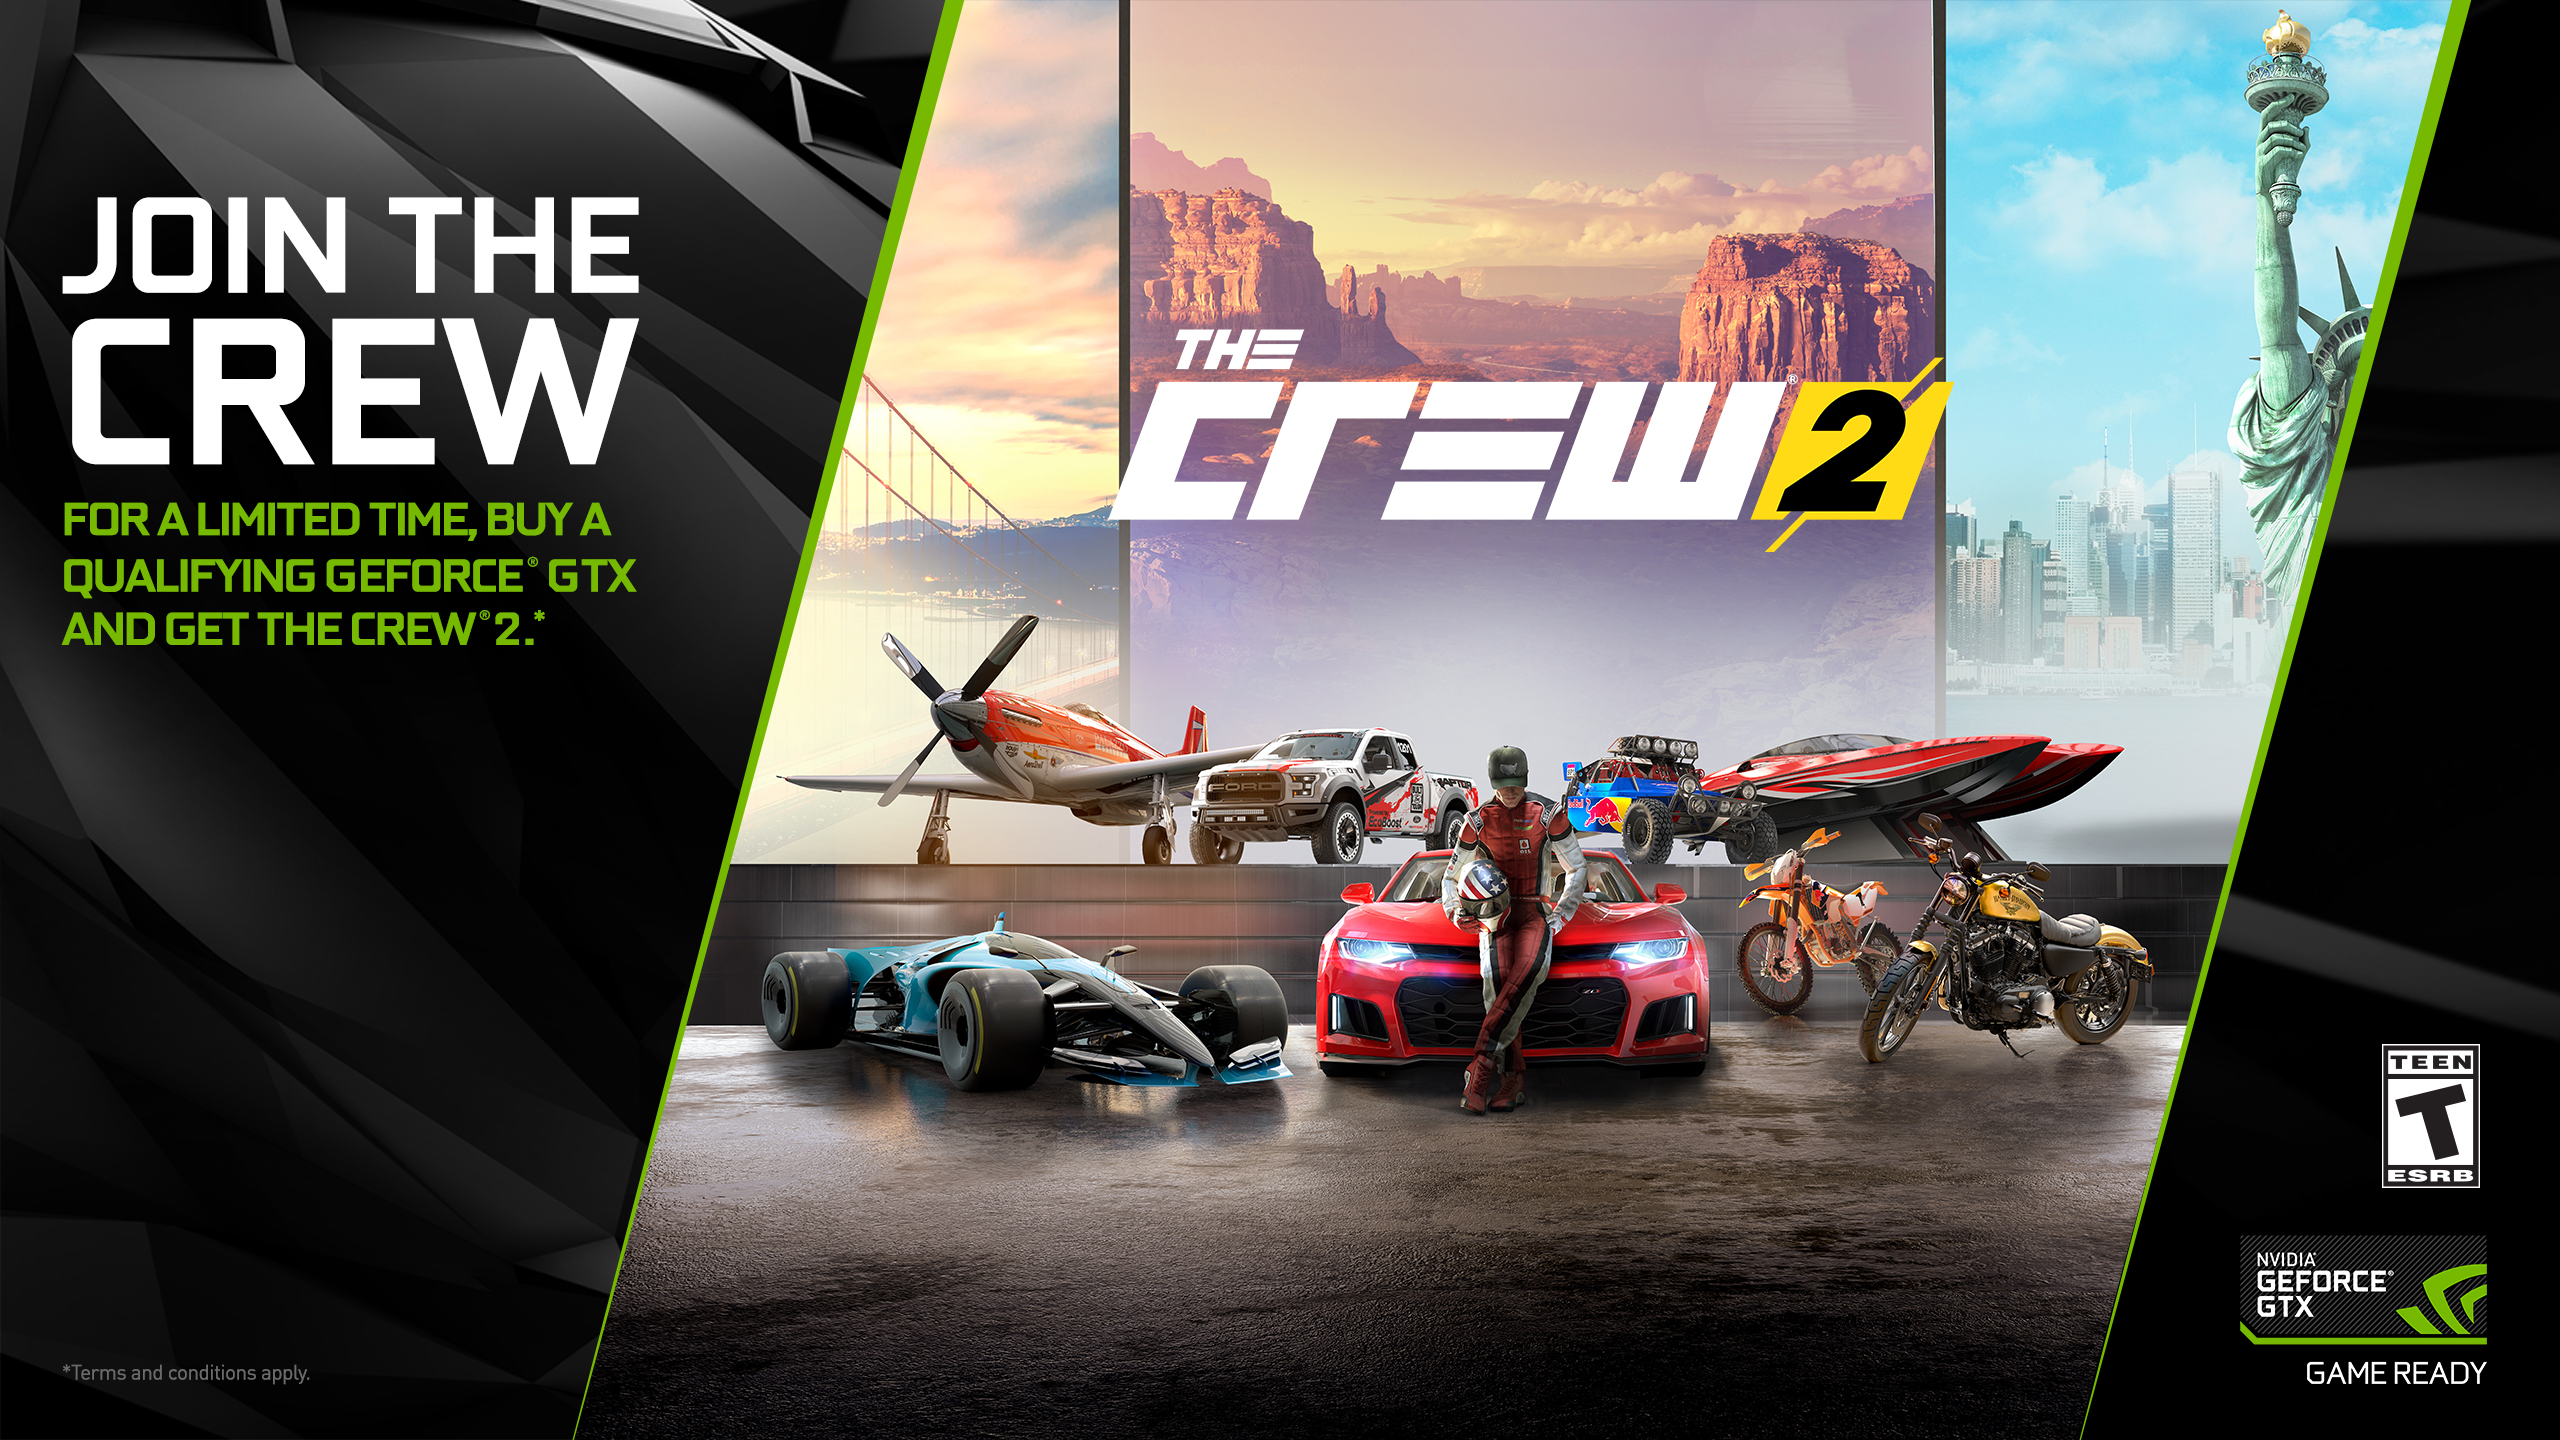 Join the Crew. For a limited time, buy a qualifying Geforce GTX and get The Crew 2. Terms and conditions apply.